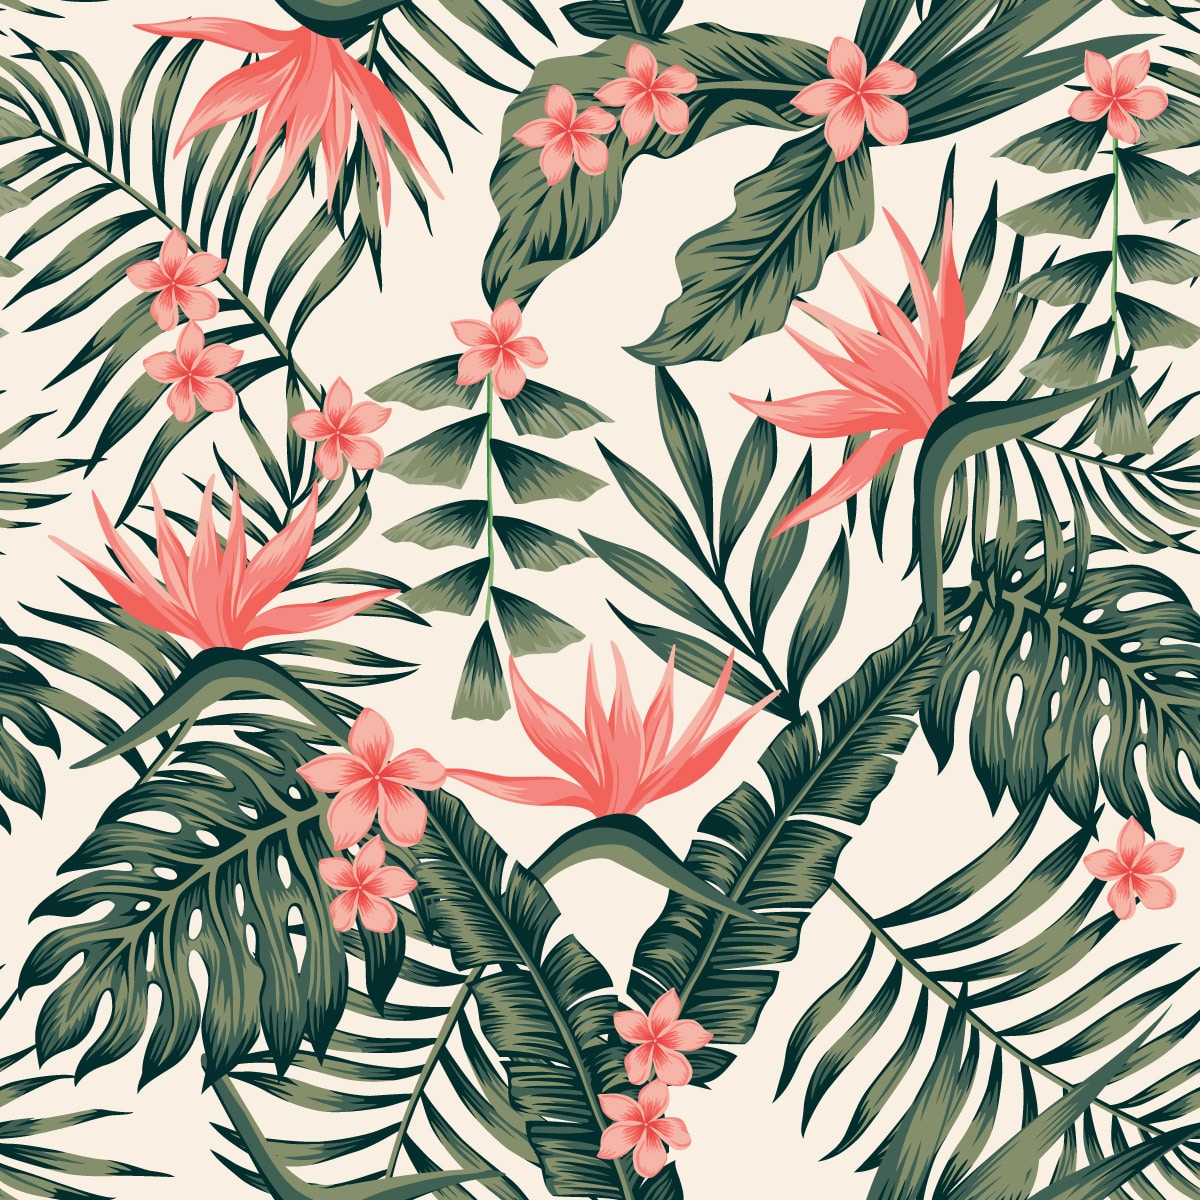 Pastel Flowers and Leaves Tropical Wallpaper Pattern - Wall to Wall Graphics